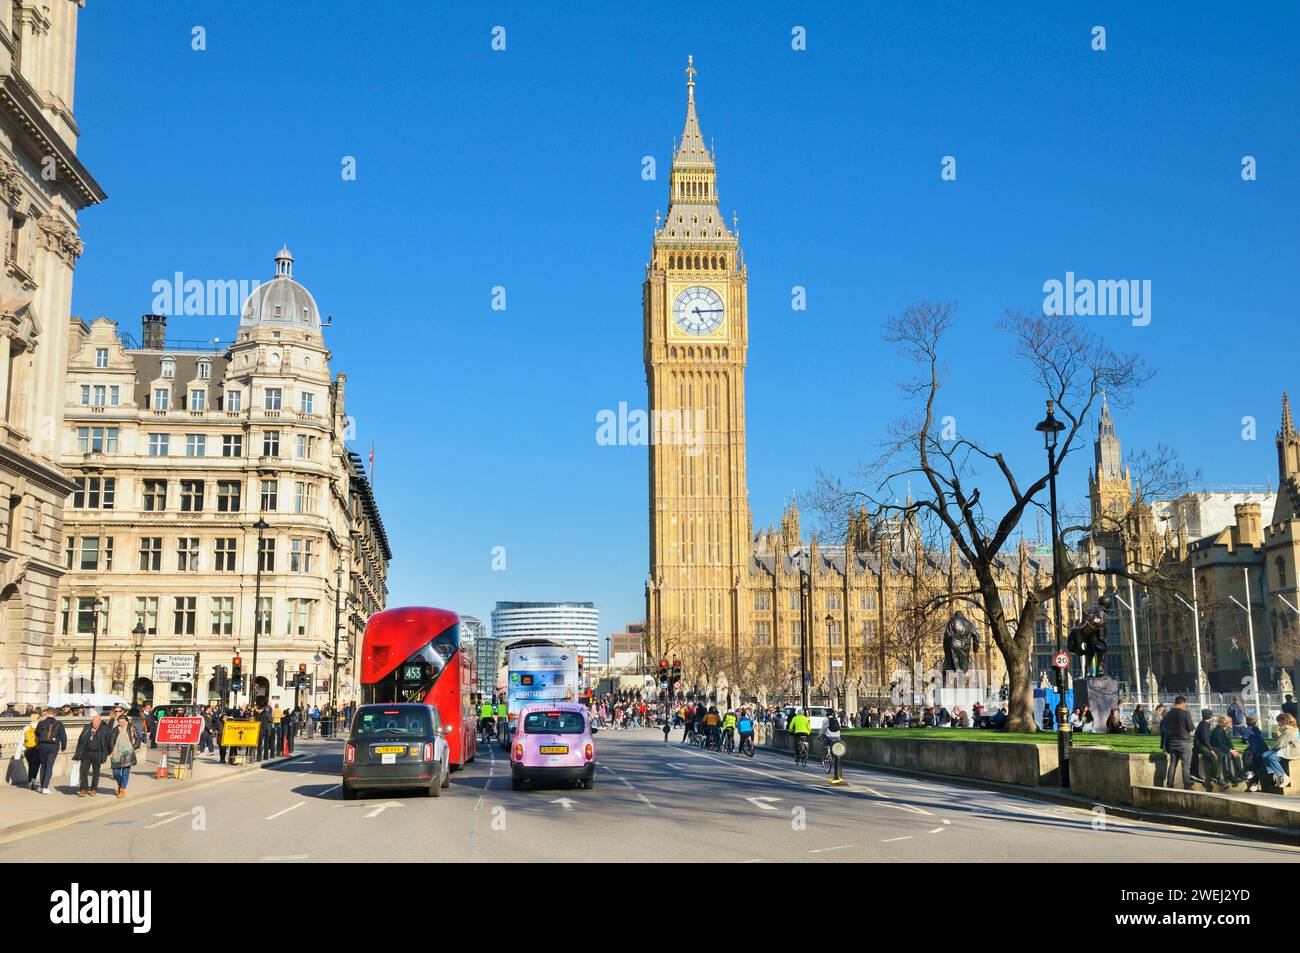 View from Great George Street towards Elizabeth Tower, commonly known as Big Ben, with Houses of Parliament, City of Westminster, central London, UK Stock Photo